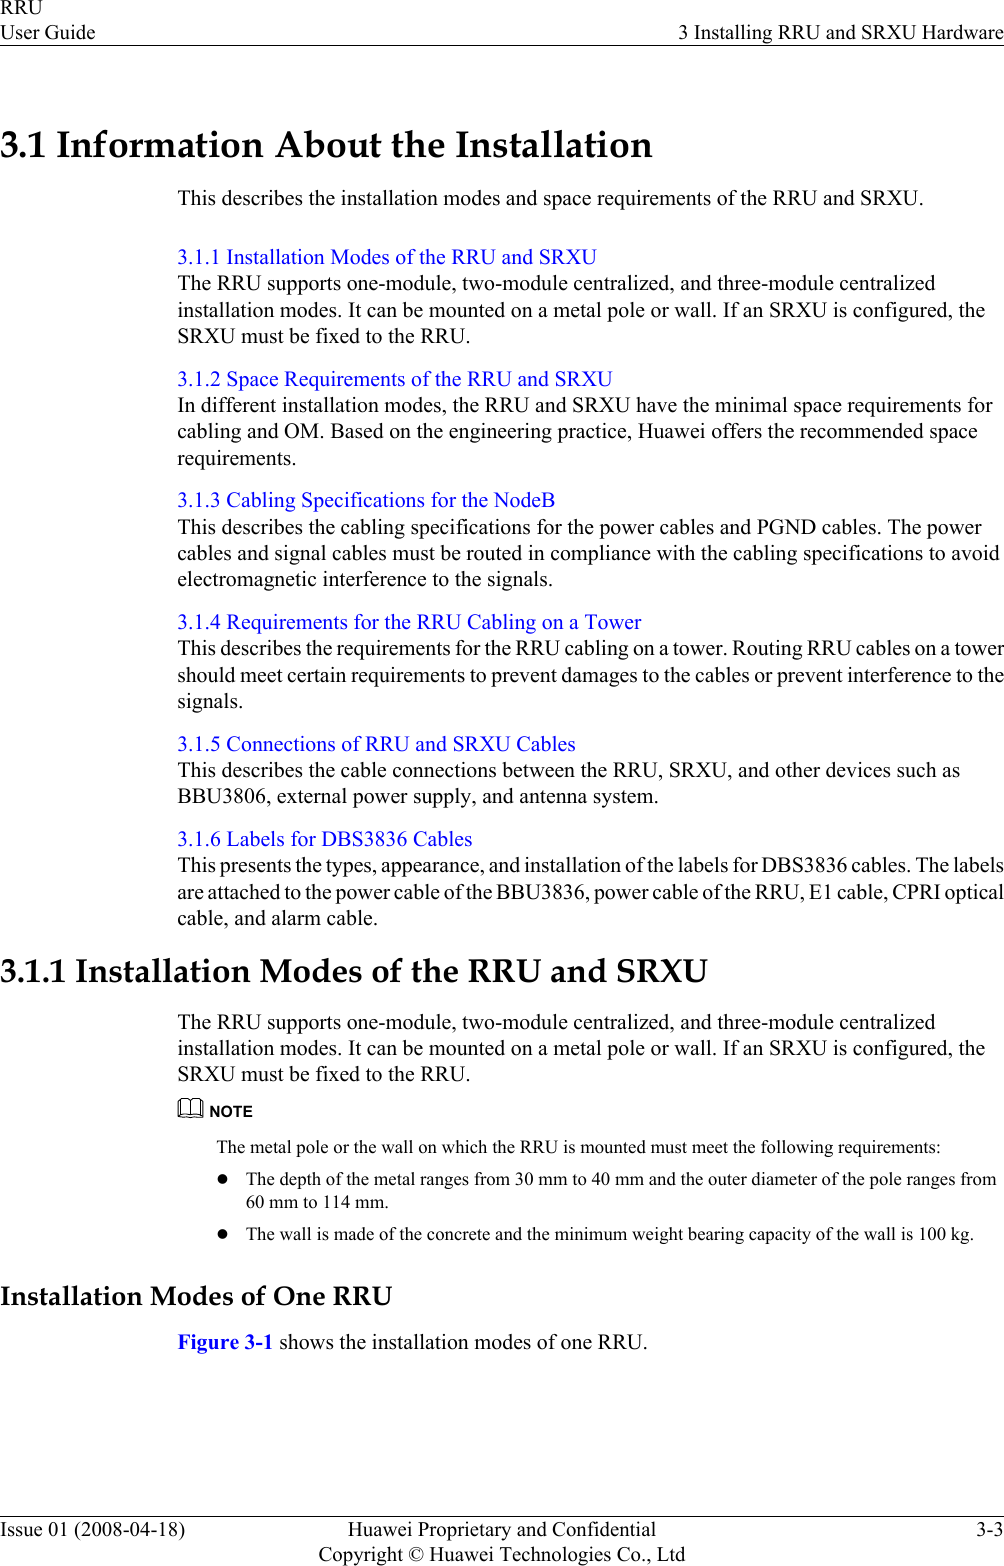 3.1 Information About the InstallationThis describes the installation modes and space requirements of the RRU and SRXU.3.1.1 Installation Modes of the RRU and SRXUThe RRU supports one-module, two-module centralized, and three-module centralizedinstallation modes. It can be mounted on a metal pole or wall. If an SRXU is configured, theSRXU must be fixed to the RRU.3.1.2 Space Requirements of the RRU and SRXUIn different installation modes, the RRU and SRXU have the minimal space requirements forcabling and OM. Based on the engineering practice, Huawei offers the recommended spacerequirements.3.1.3 Cabling Specifications for the NodeBThis describes the cabling specifications for the power cables and PGND cables. The powercables and signal cables must be routed in compliance with the cabling specifications to avoidelectromagnetic interference to the signals.3.1.4 Requirements for the RRU Cabling on a TowerThis describes the requirements for the RRU cabling on a tower. Routing RRU cables on a towershould meet certain requirements to prevent damages to the cables or prevent interference to thesignals.3.1.5 Connections of RRU and SRXU CablesThis describes the cable connections between the RRU, SRXU, and other devices such asBBU3806, external power supply, and antenna system.3.1.6 Labels for DBS3836 CablesThis presents the types, appearance, and installation of the labels for DBS3836 cables. The labelsare attached to the power cable of the BBU3836, power cable of the RRU, E1 cable, CPRI opticalcable, and alarm cable.3.1.1 Installation Modes of the RRU and SRXUThe RRU supports one-module, two-module centralized, and three-module centralizedinstallation modes. It can be mounted on a metal pole or wall. If an SRXU is configured, theSRXU must be fixed to the RRU.NOTEThe metal pole or the wall on which the RRU is mounted must meet the following requirements:lThe depth of the metal ranges from 30 mm to 40 mm and the outer diameter of the pole ranges from60 mm to 114 mm.lThe wall is made of the concrete and the minimum weight bearing capacity of the wall is 100 kg.Installation Modes of One RRUFigure 3-1 shows the installation modes of one RRU.RRUUser Guide 3 Installing RRU and SRXU HardwareIssue 01 (2008-04-18) Huawei Proprietary and ConfidentialCopyright © Huawei Technologies Co., Ltd3-3